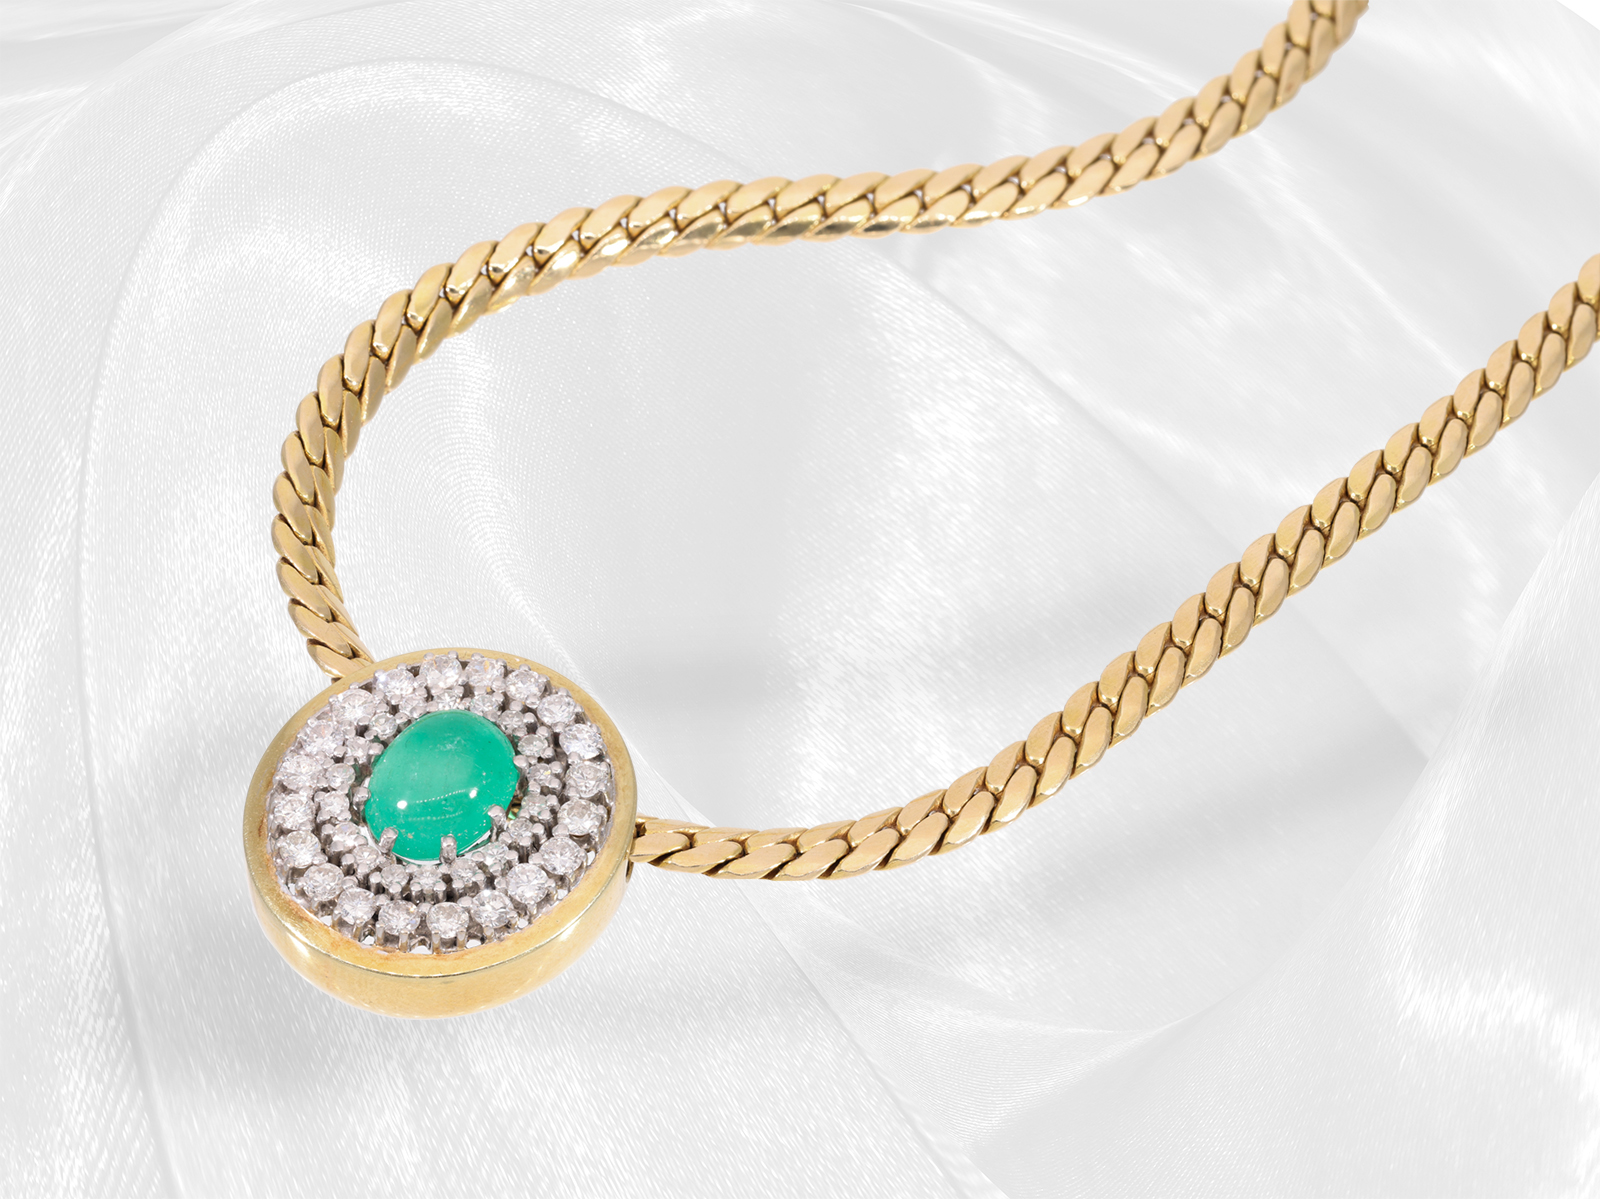 High-quality gold necklace with large emerald/brilliant-cut diamond gold pendant, approx. 6.14ct - Image 4 of 5